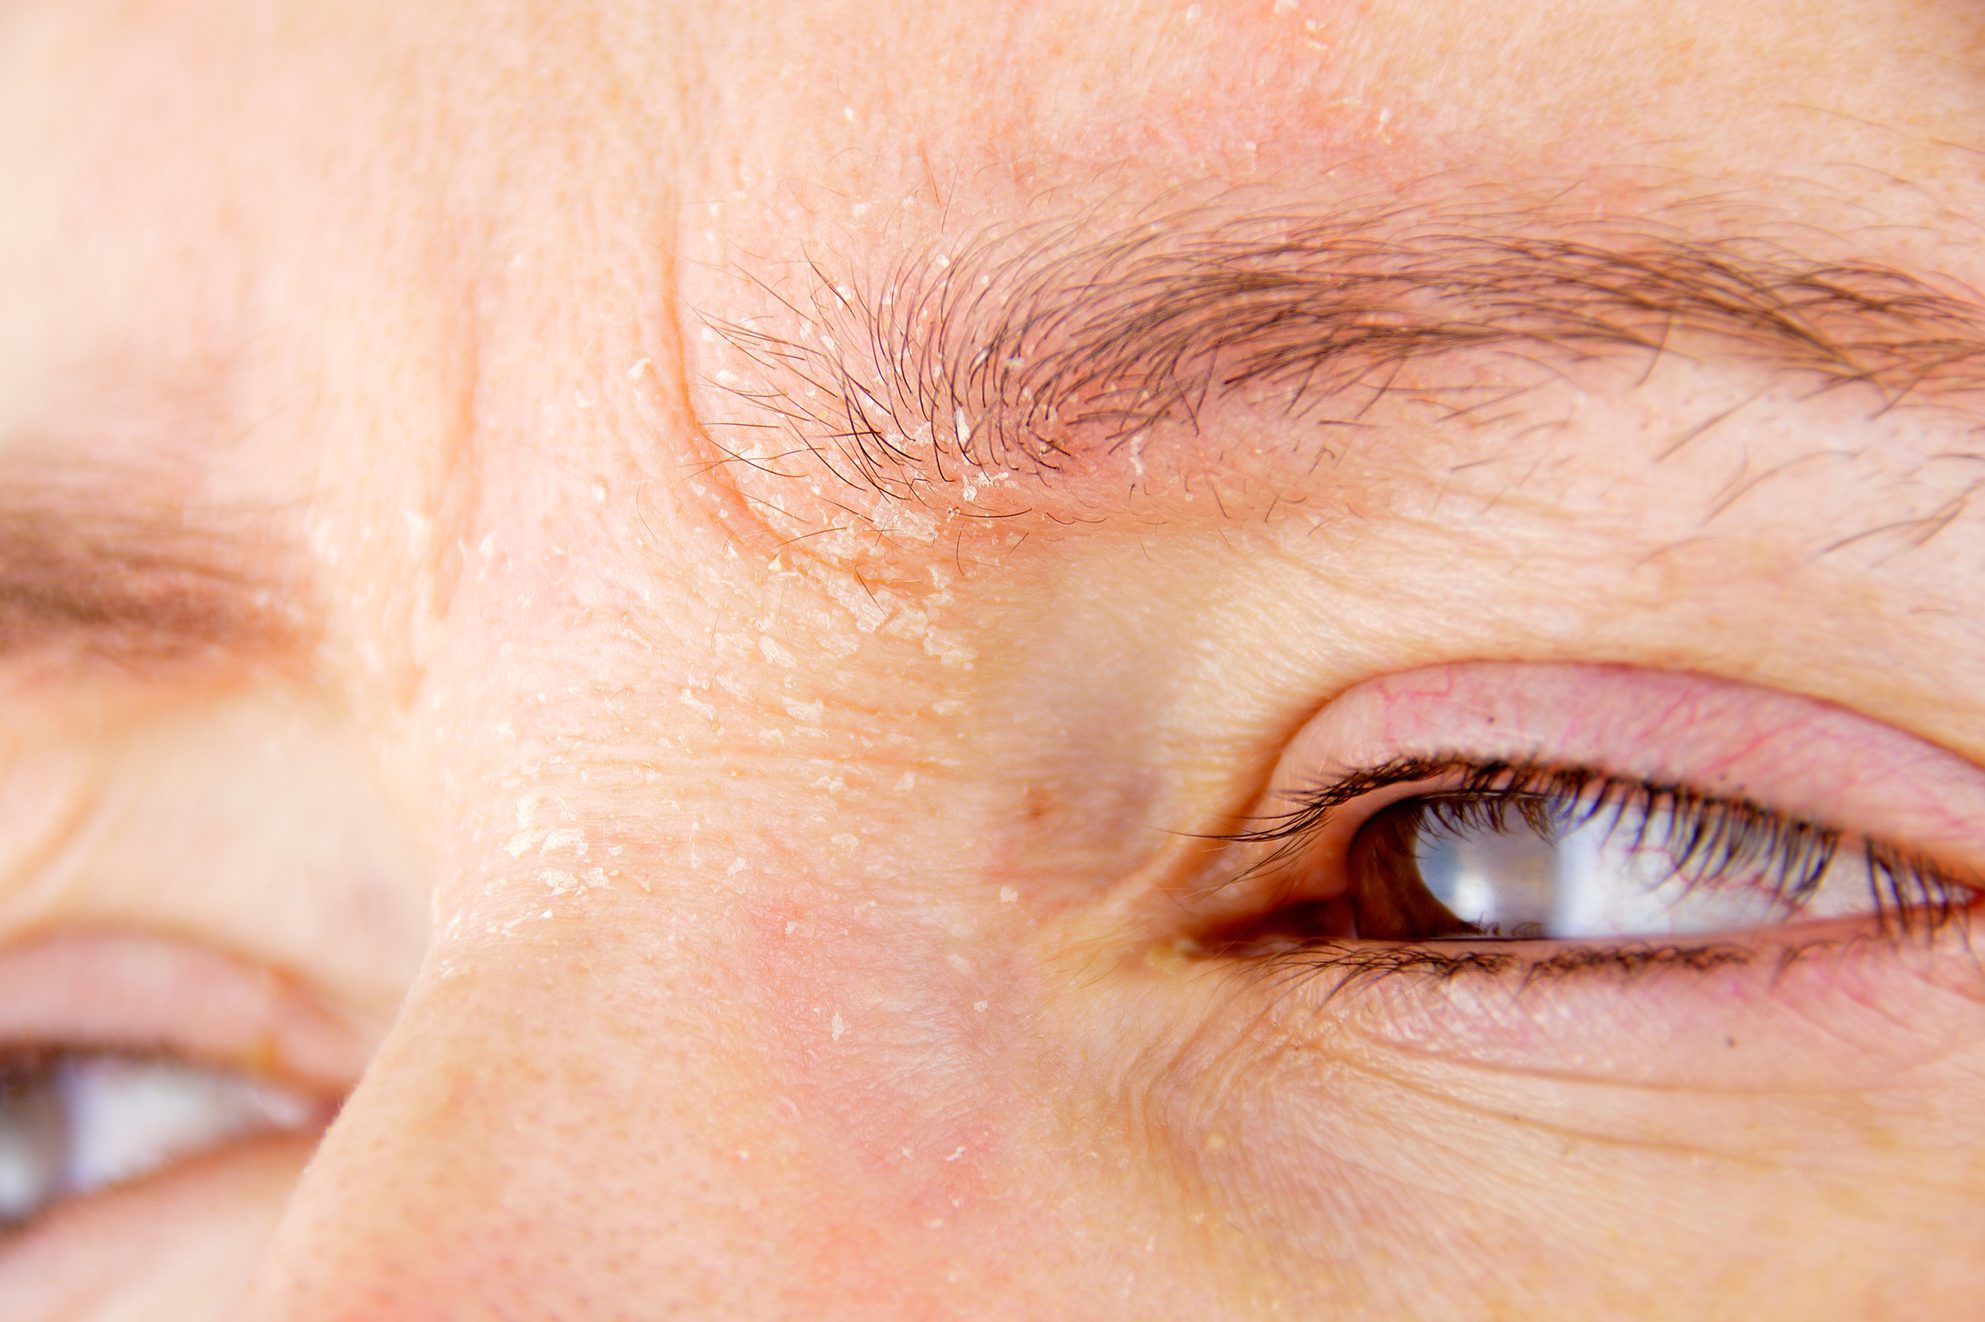 Eyebrow Dandruff: Why It Happens and How to Get Rid of It | The Healthy